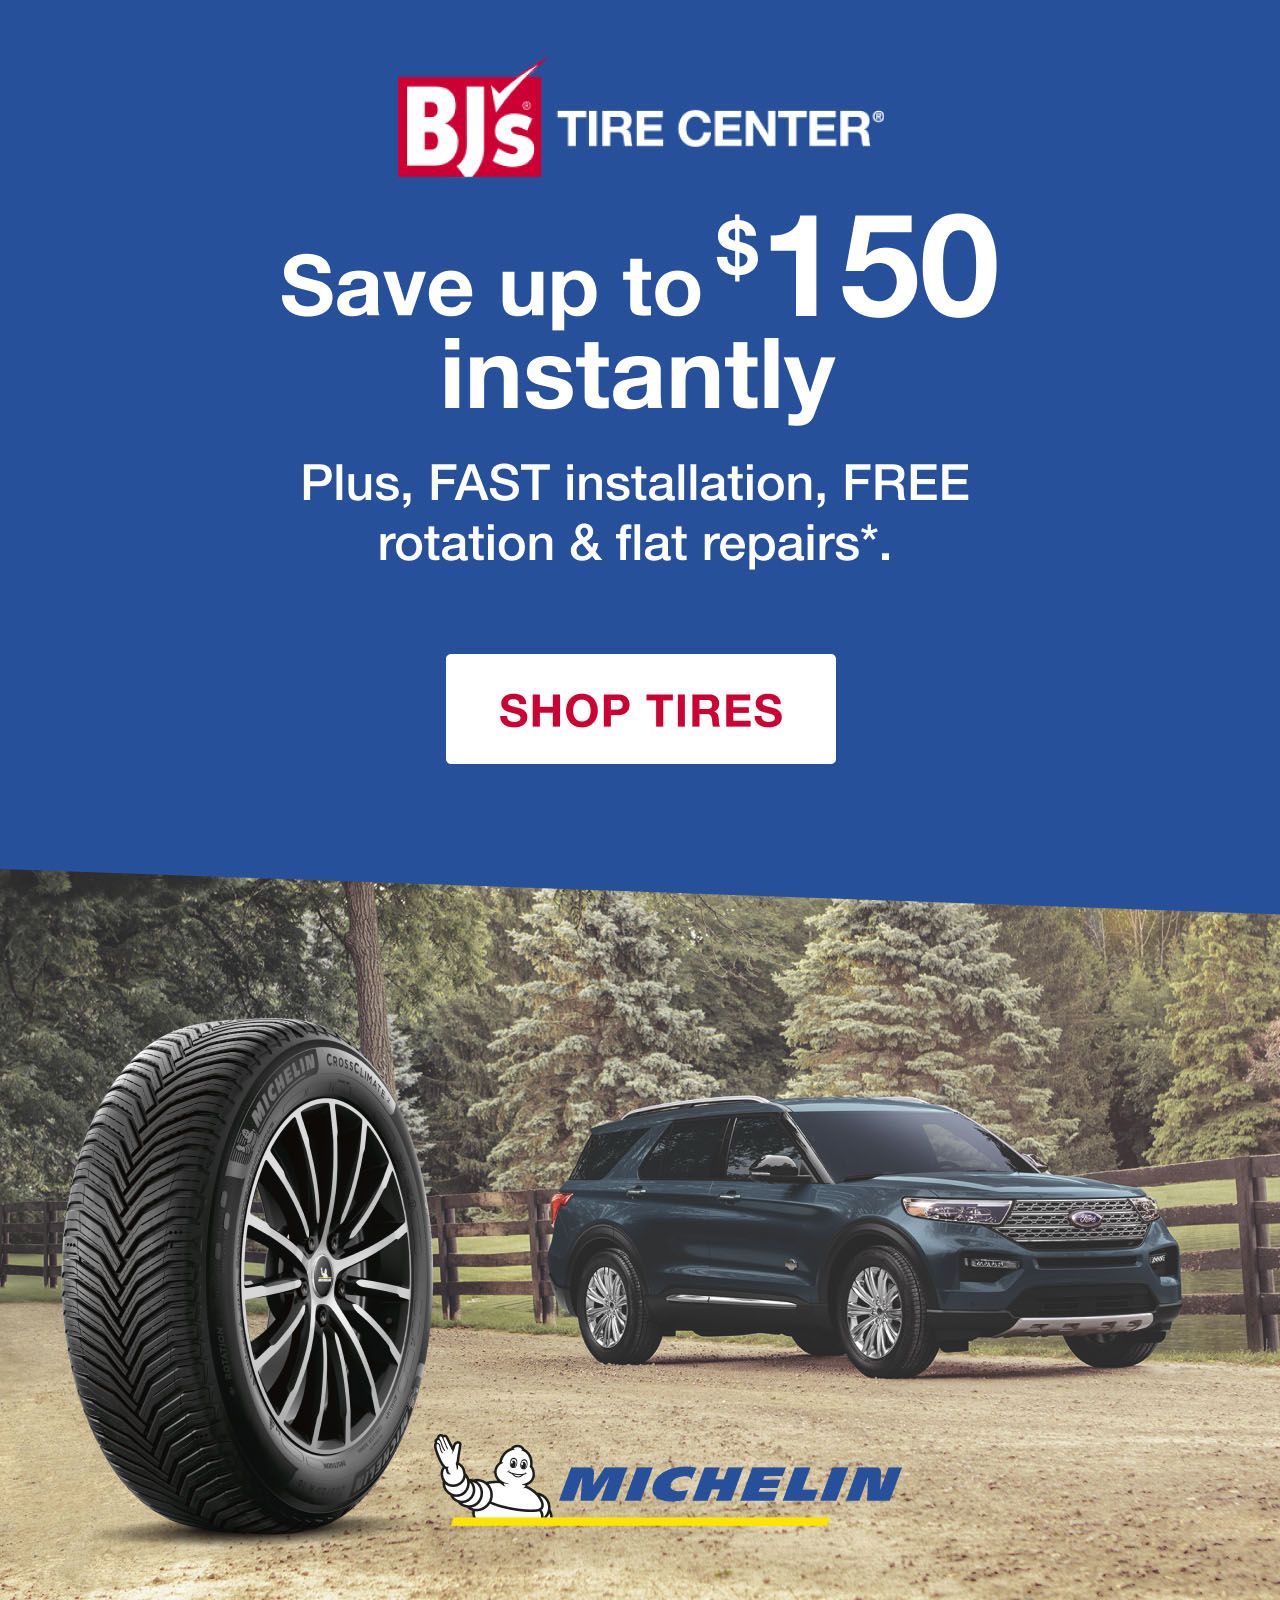 BJs Tire Center. Michelin. Save up to $120 instantly. Click to shop tires.